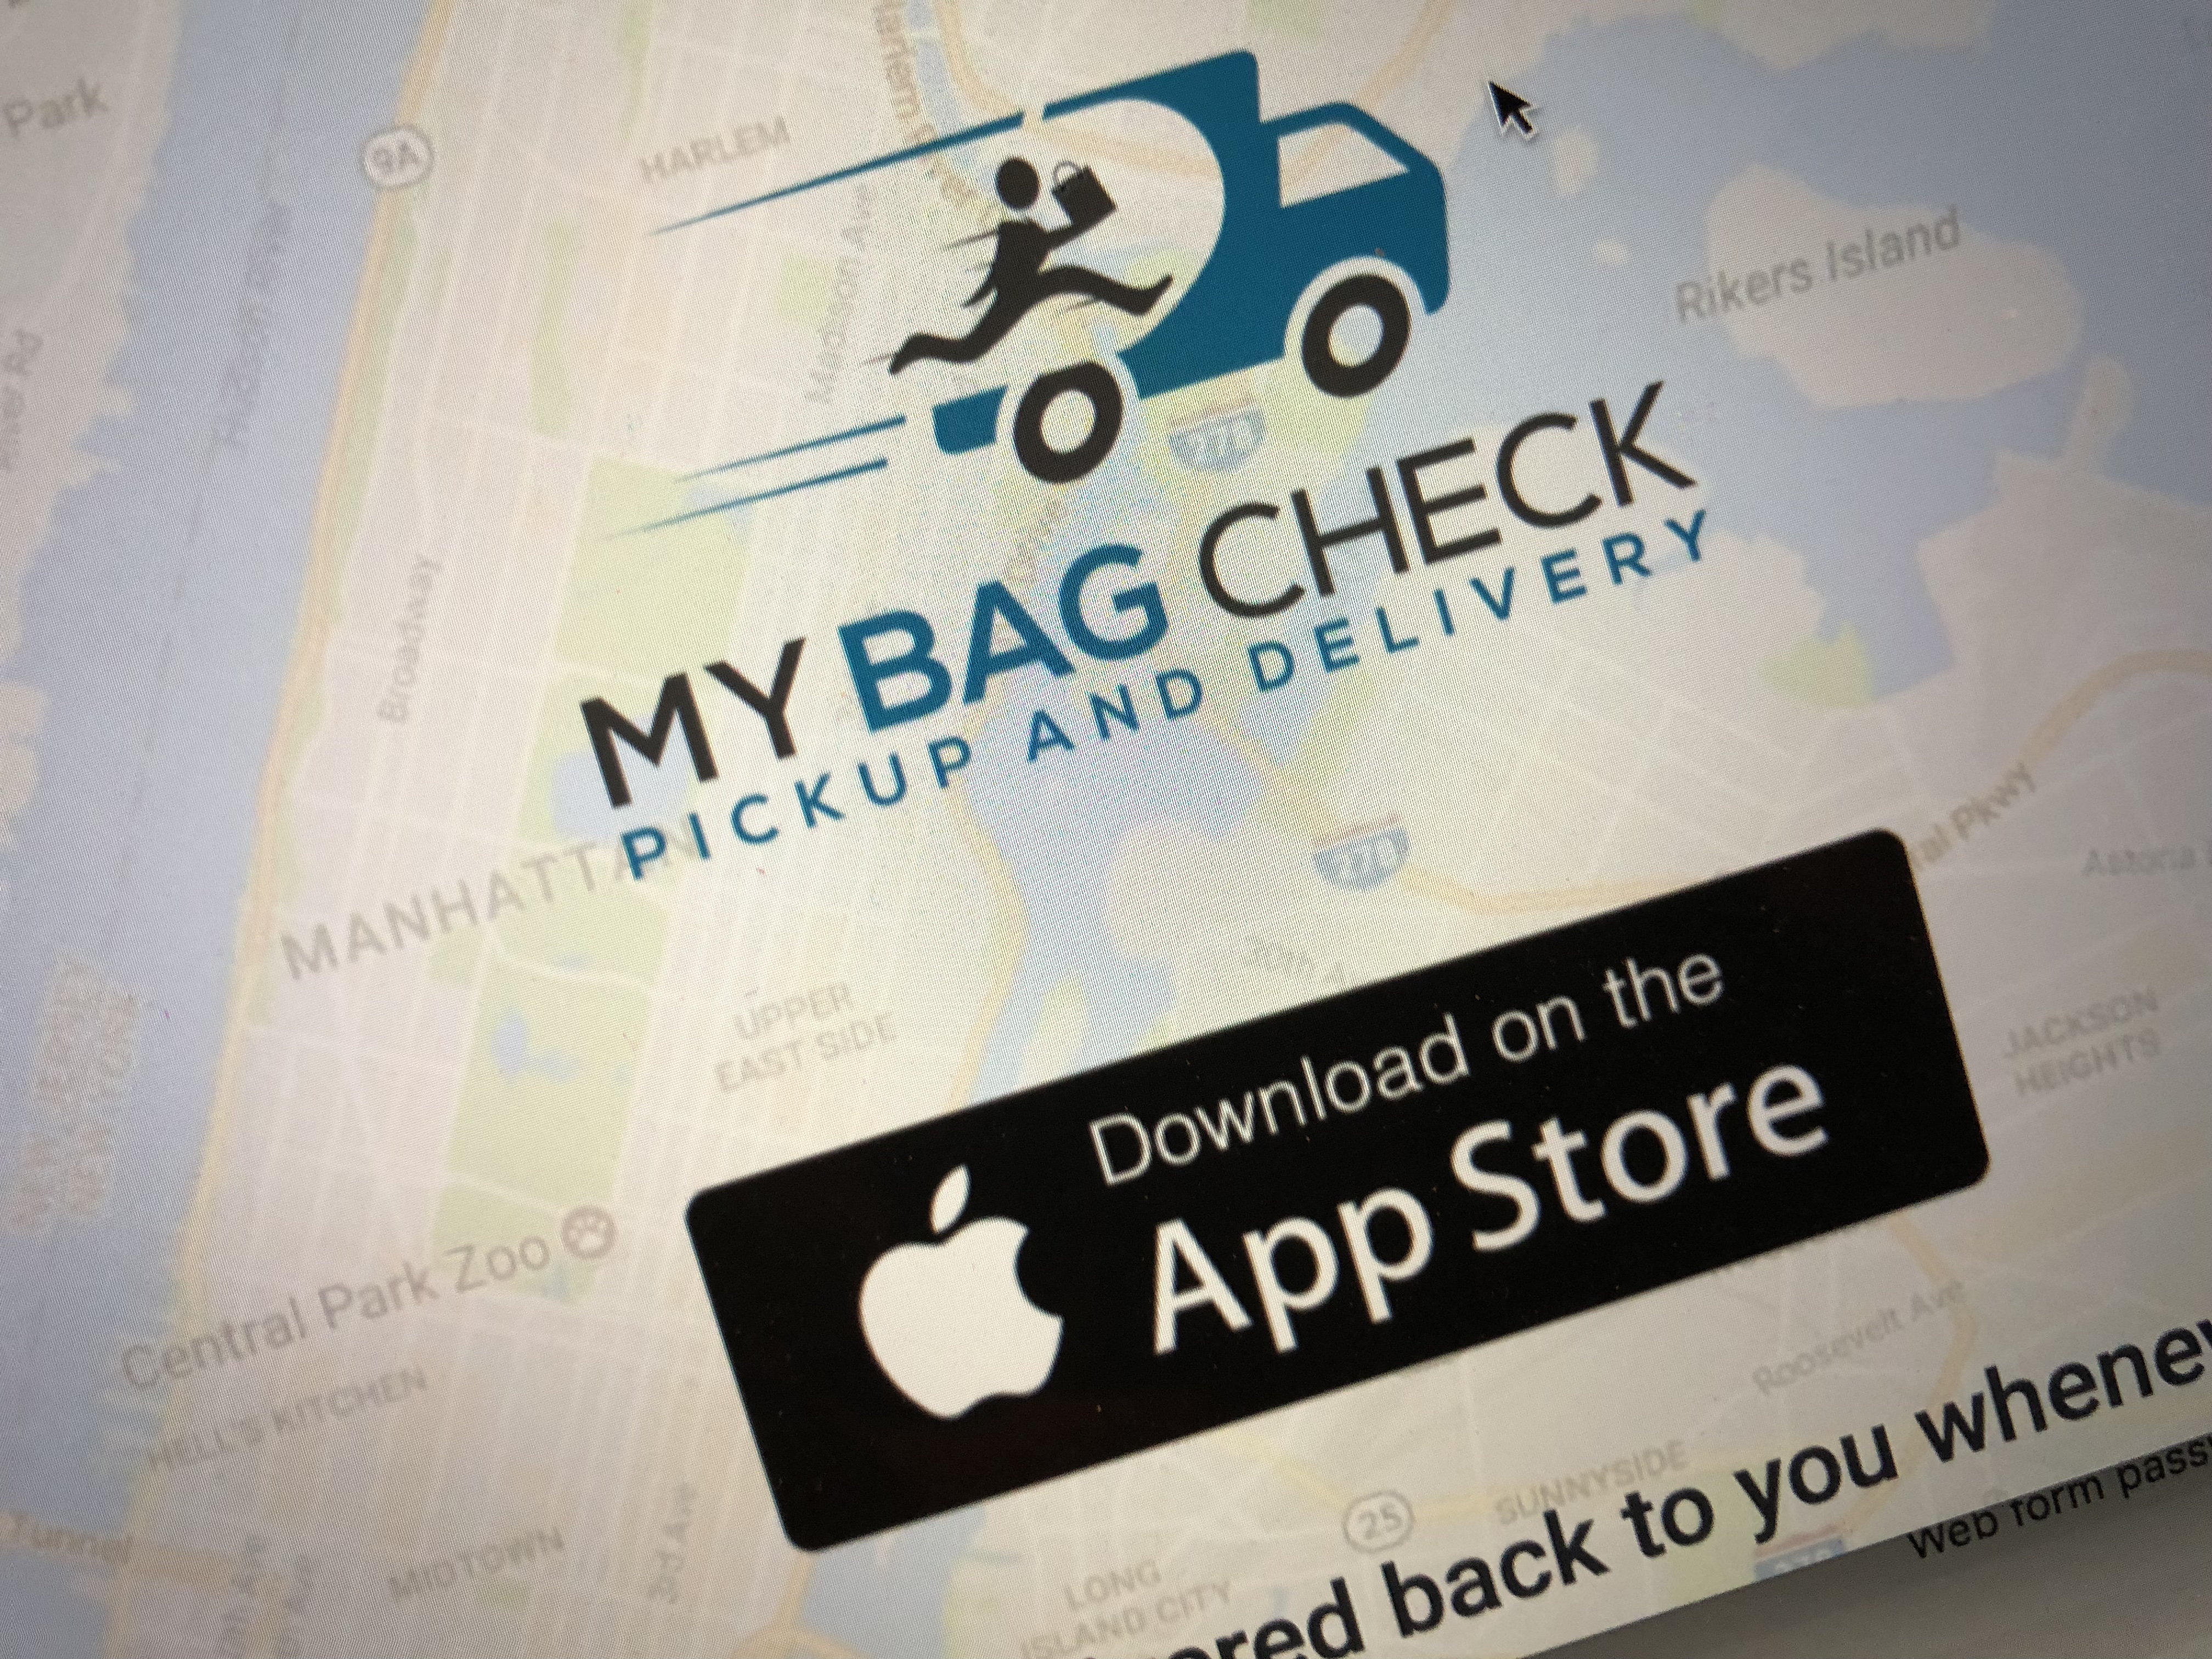 MyBagCheck lets you drop off your bags anywhere